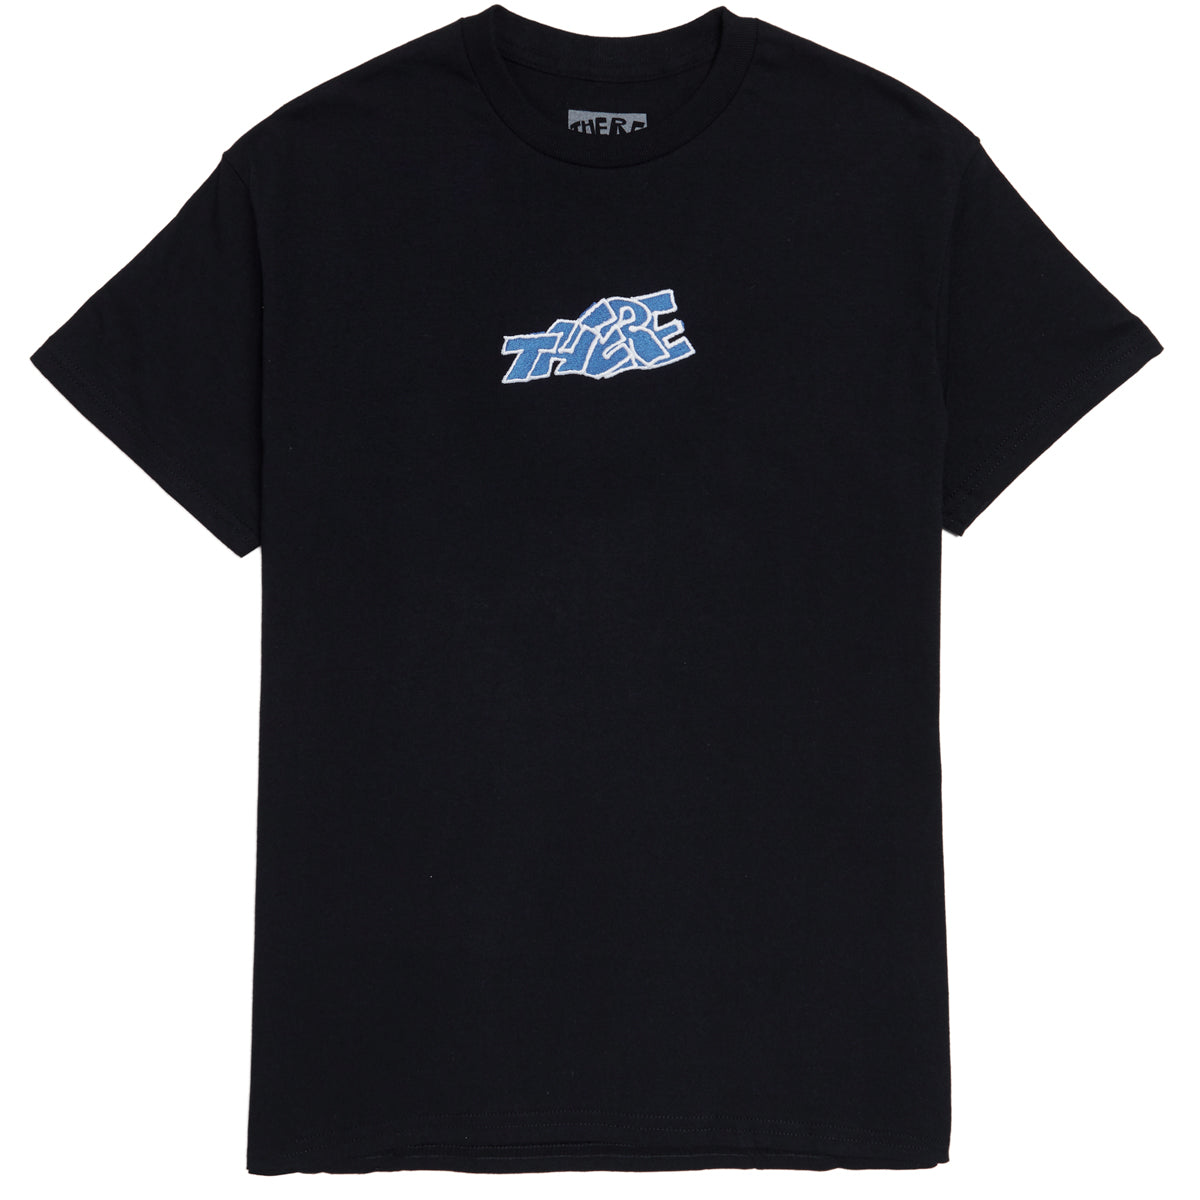 There Blocky T-Shirt - Black/White/Blue image 1